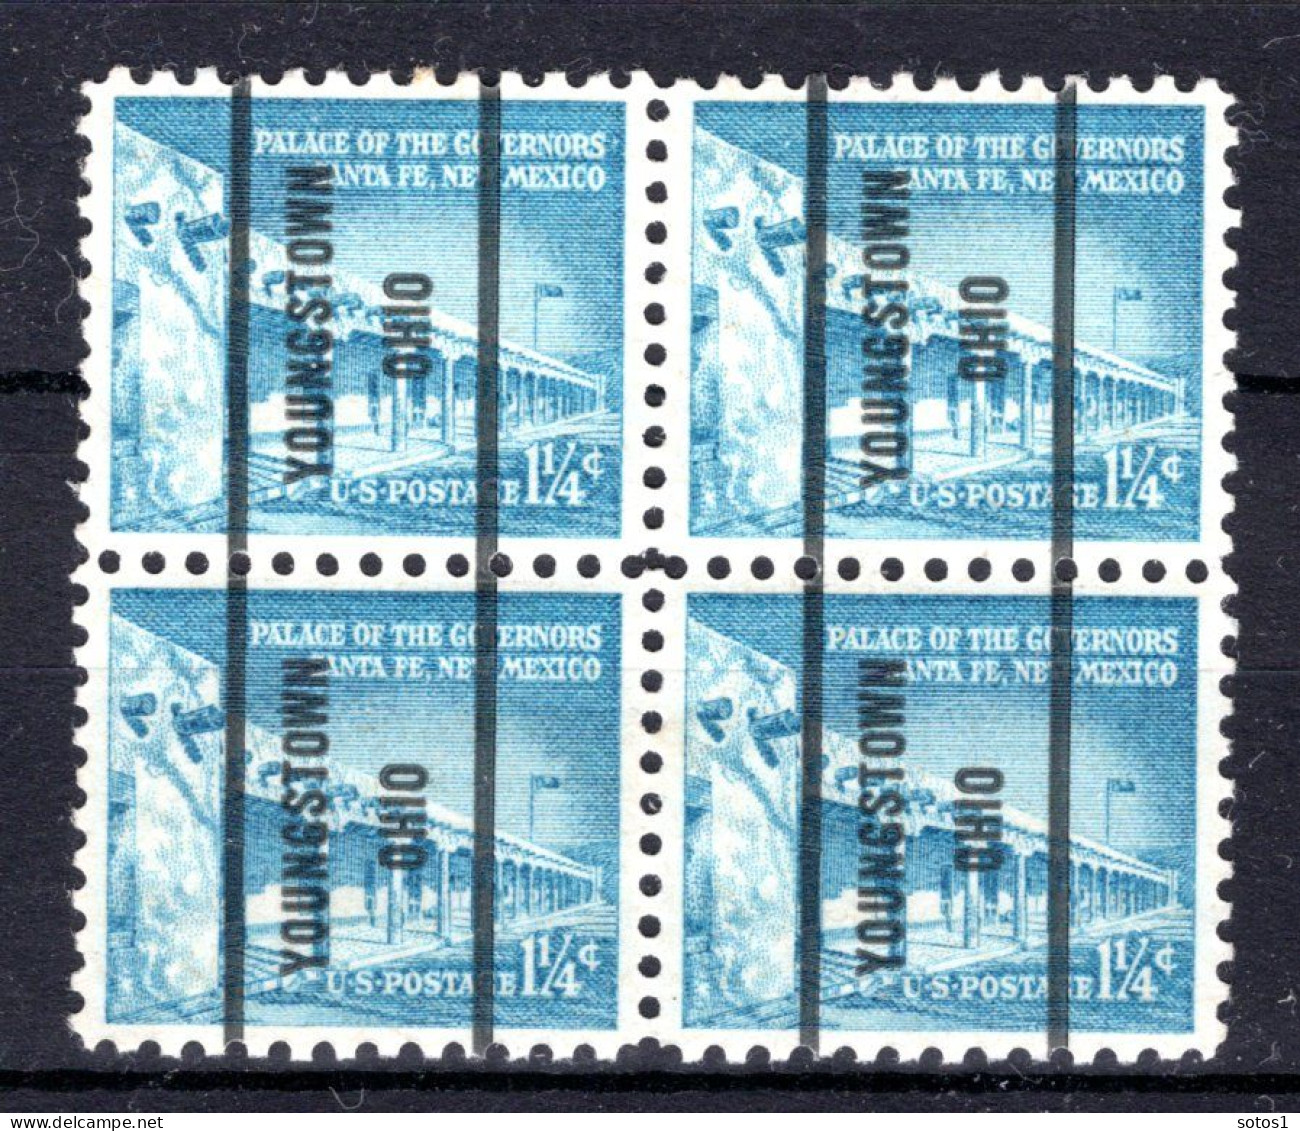 UNITED STATES Yt. 687 MH/MNH Precancelled Youngstown OHIO 4 St. - Precancels